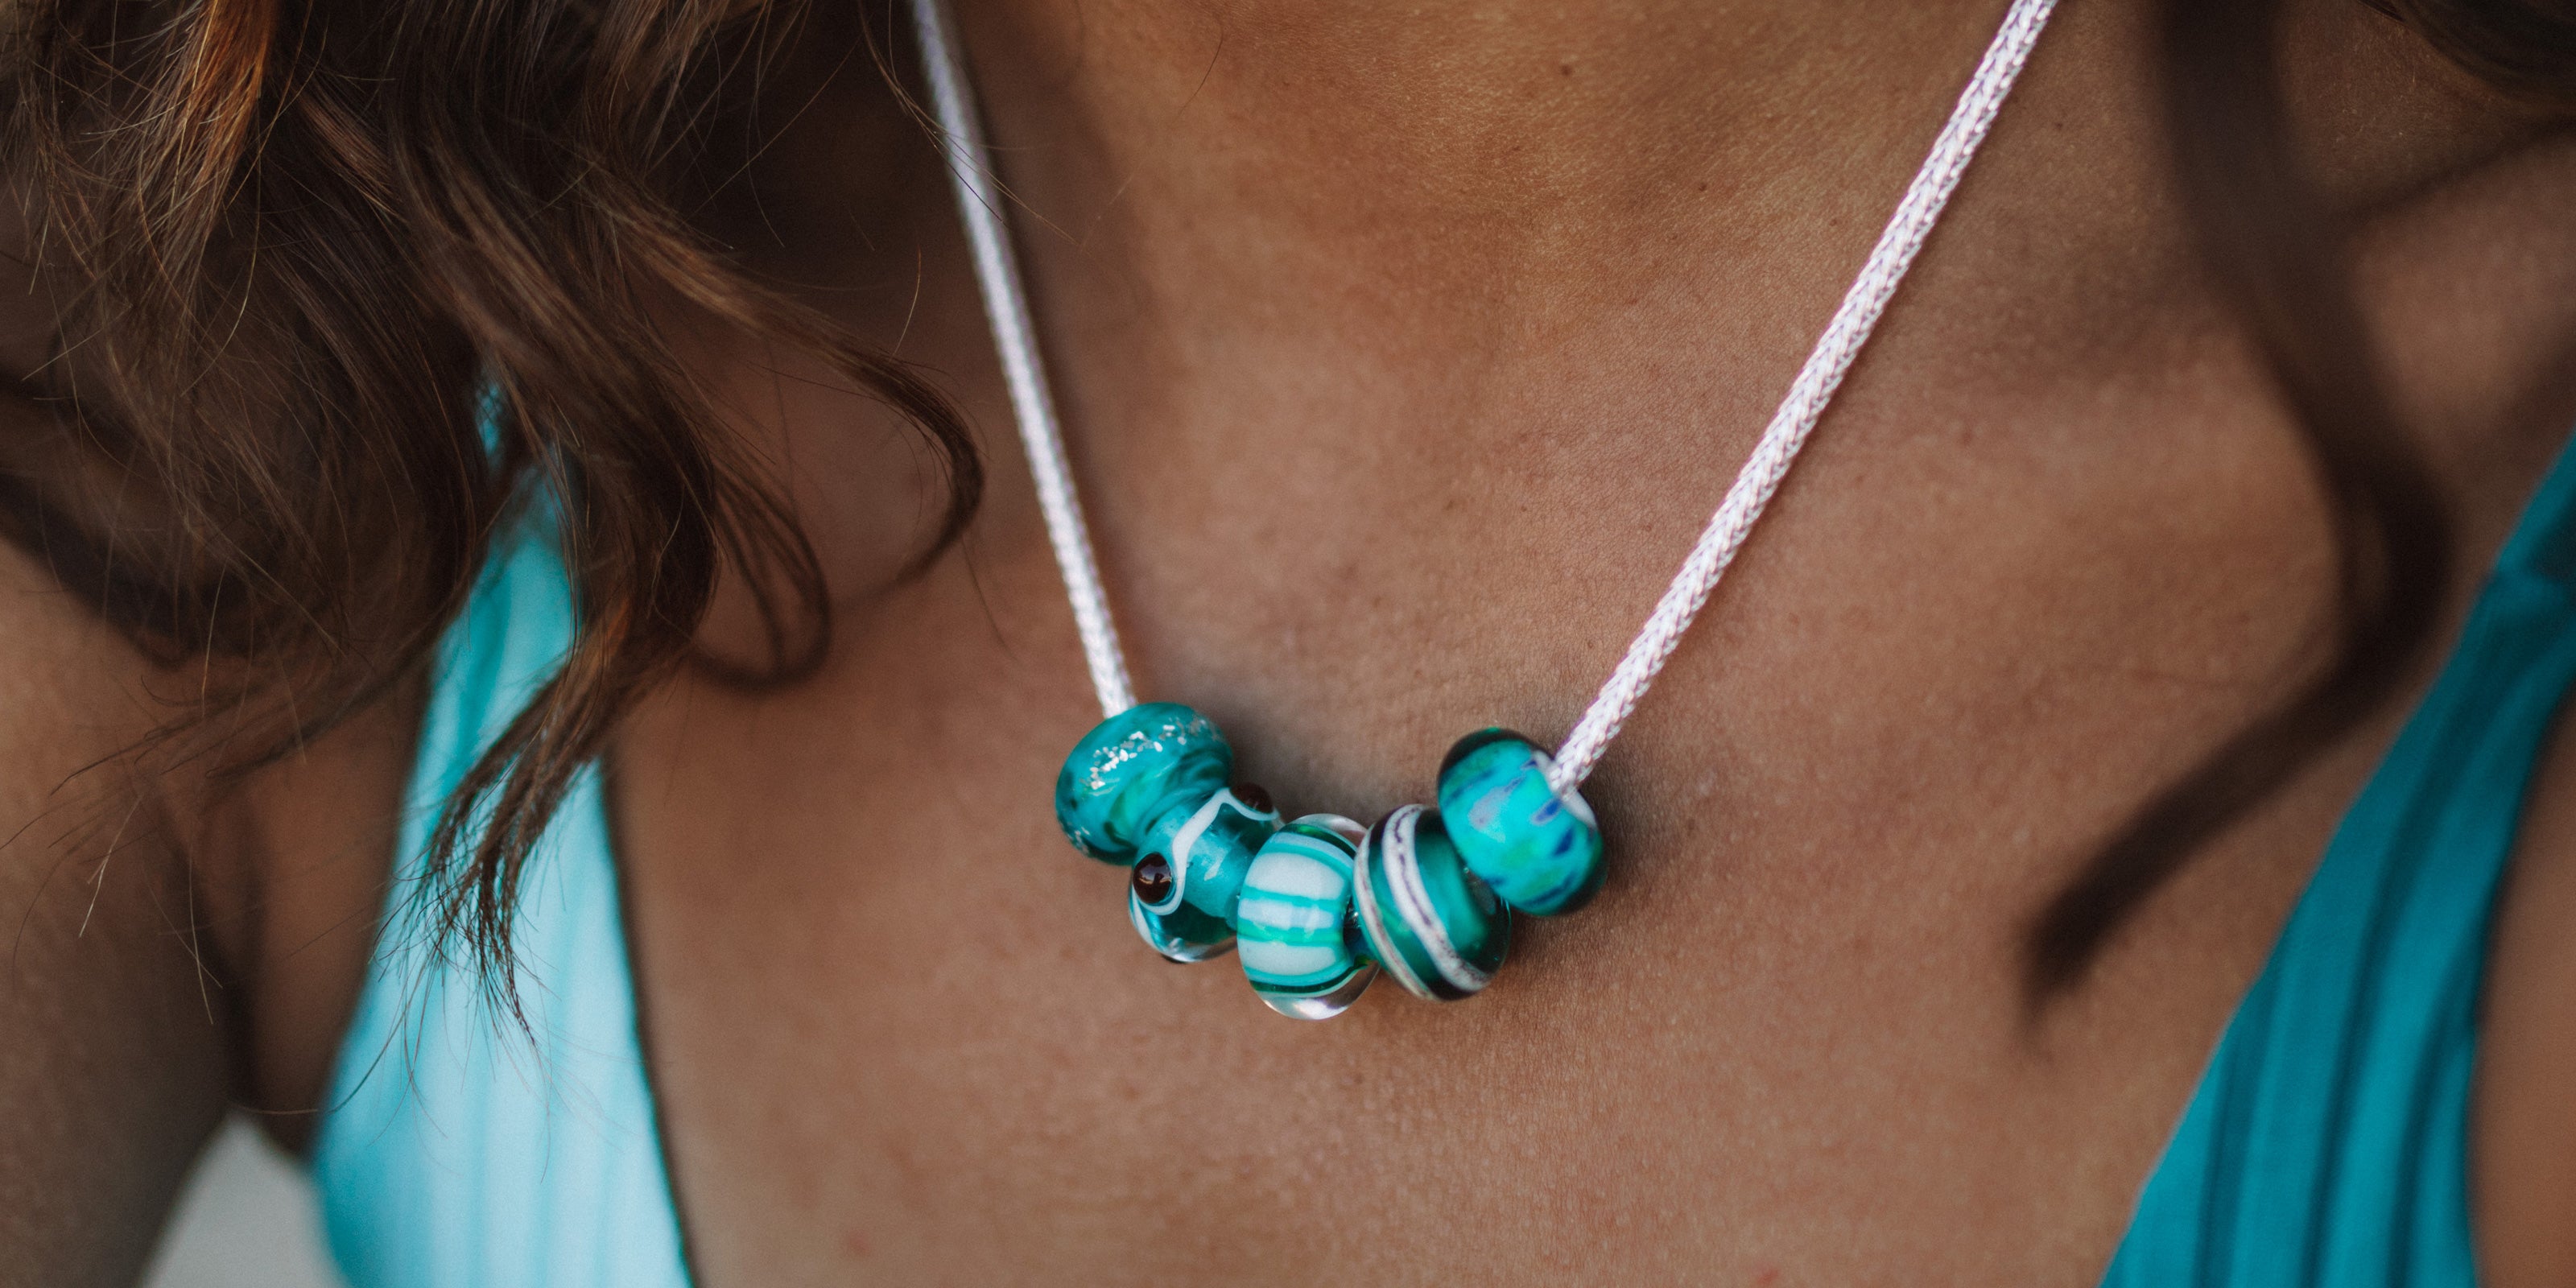 Green and turquoise surf inspired beads worn on silver dragon chain necklace by dark hair lady.